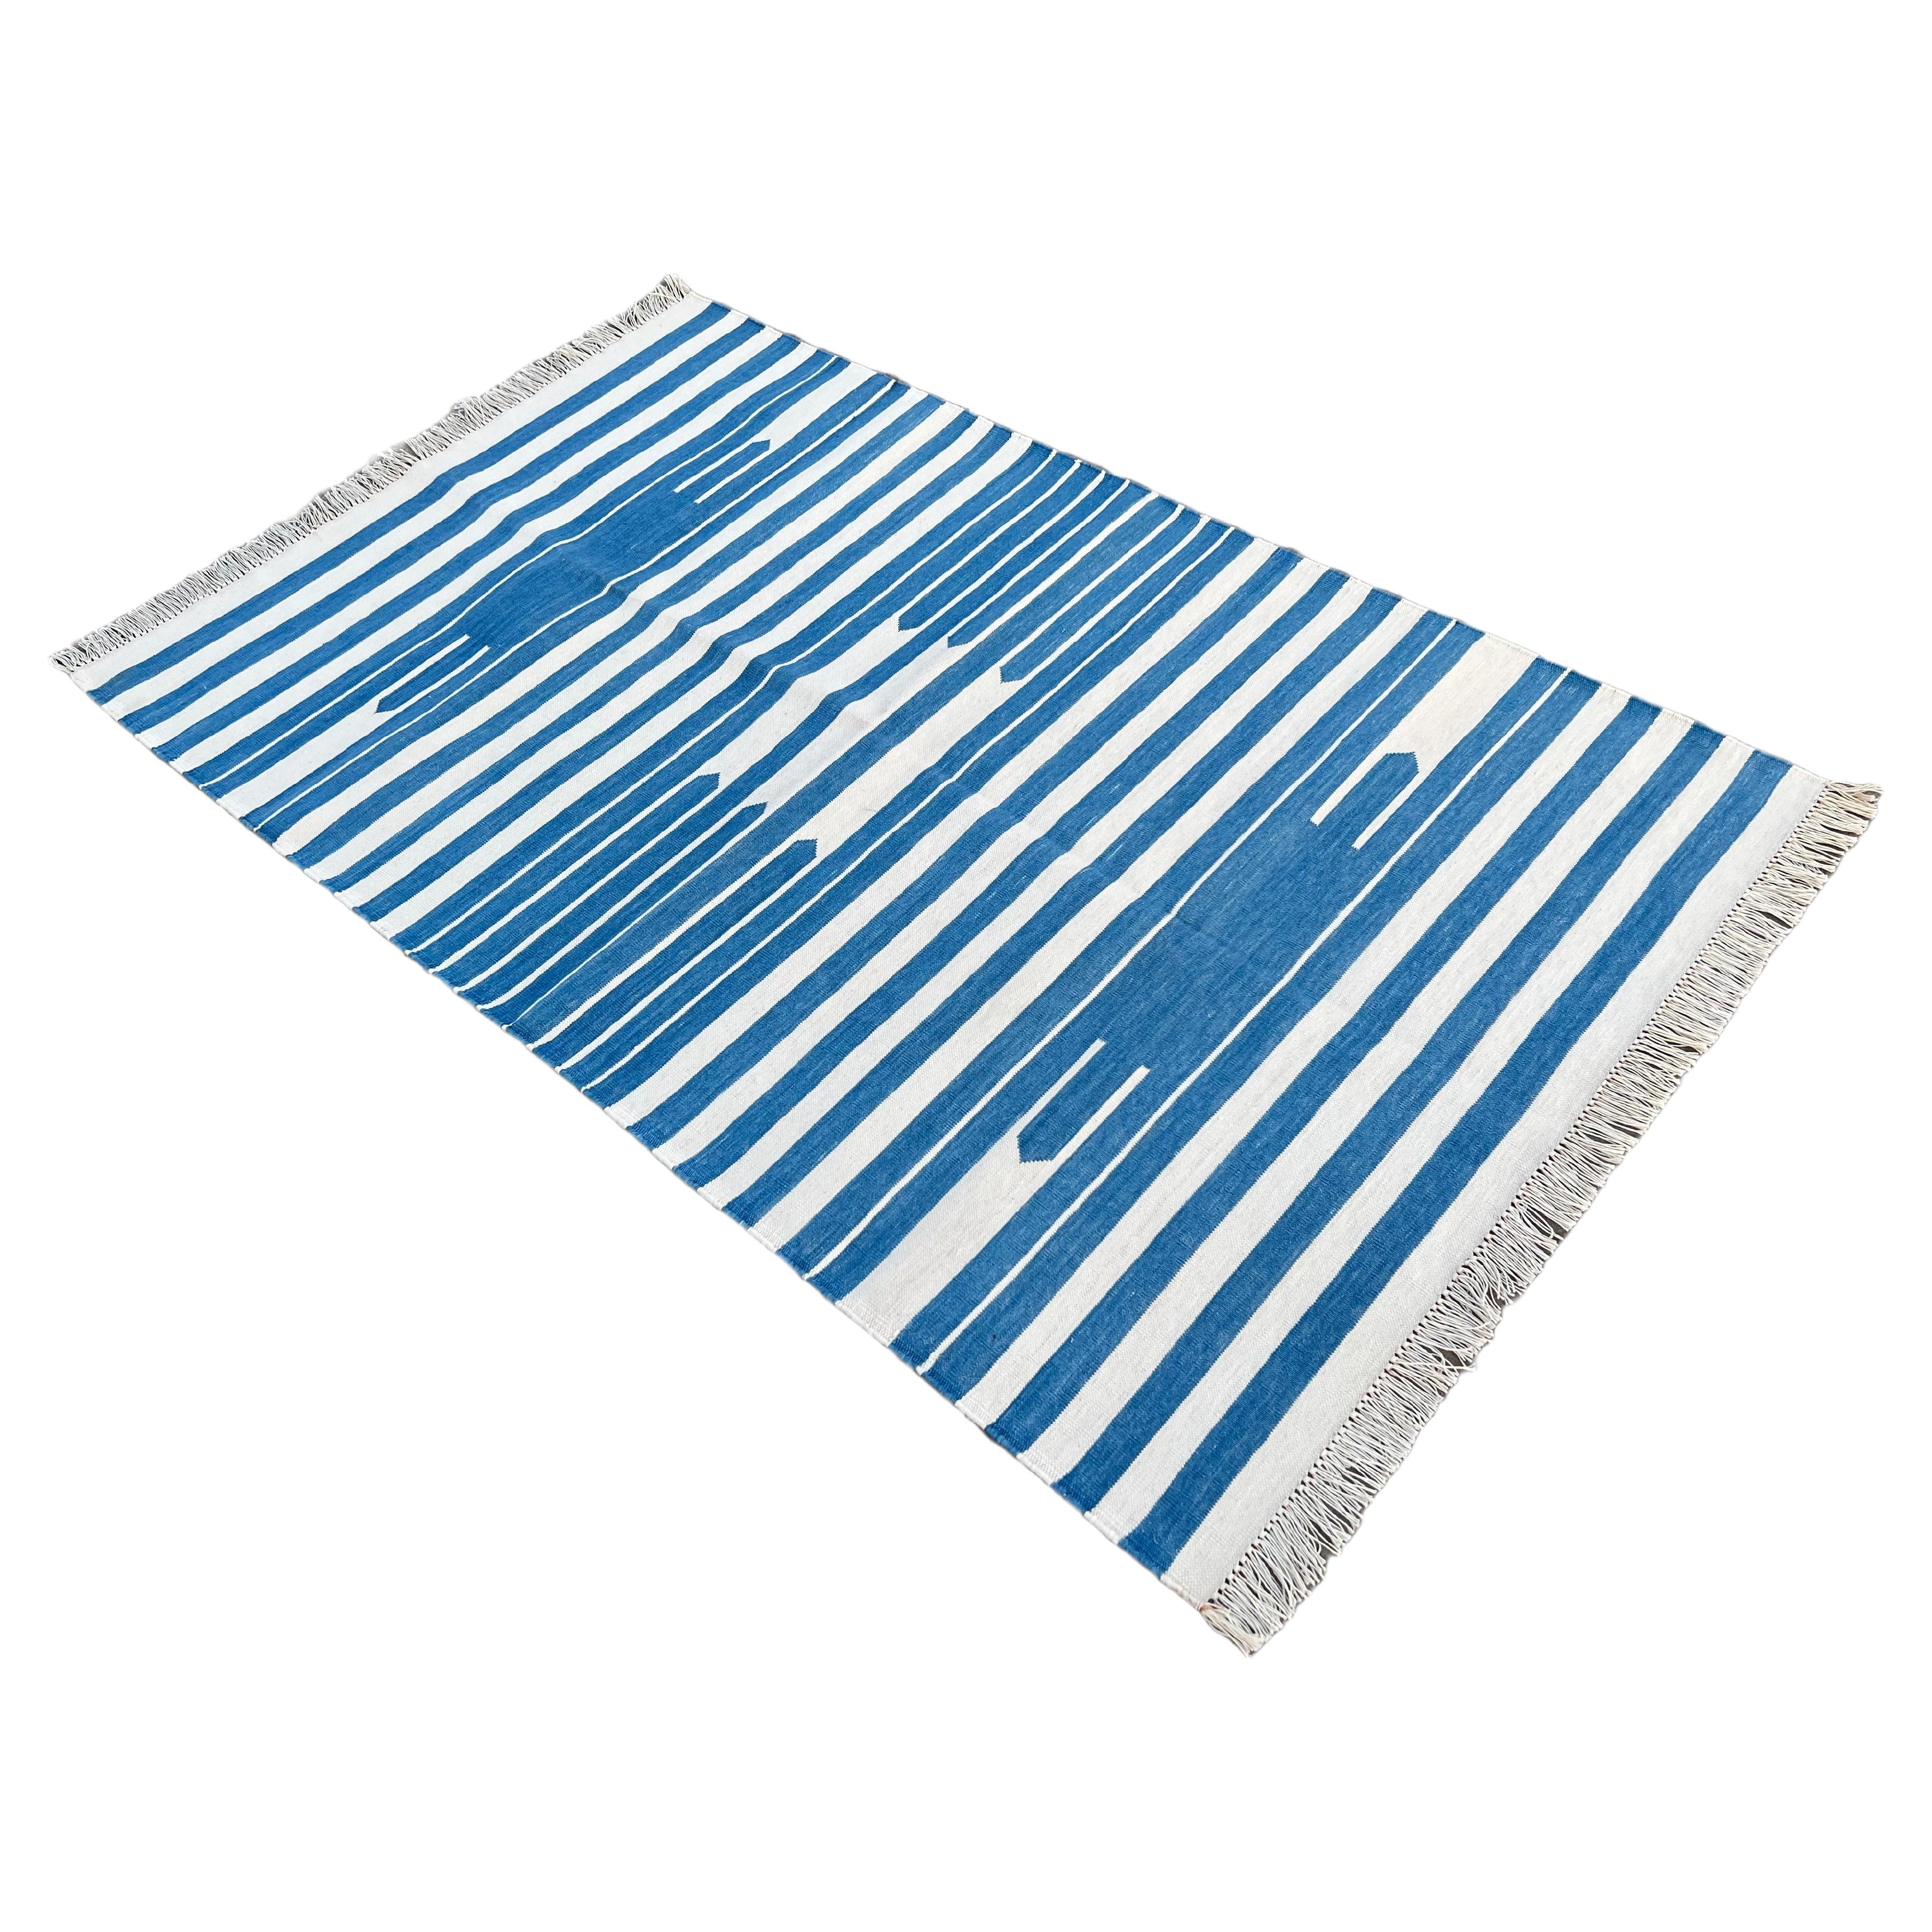 Handmade Cotton Area Flat Weave Rug, 3'x5' Blue And White Striped Indian Dhurrie For Sale